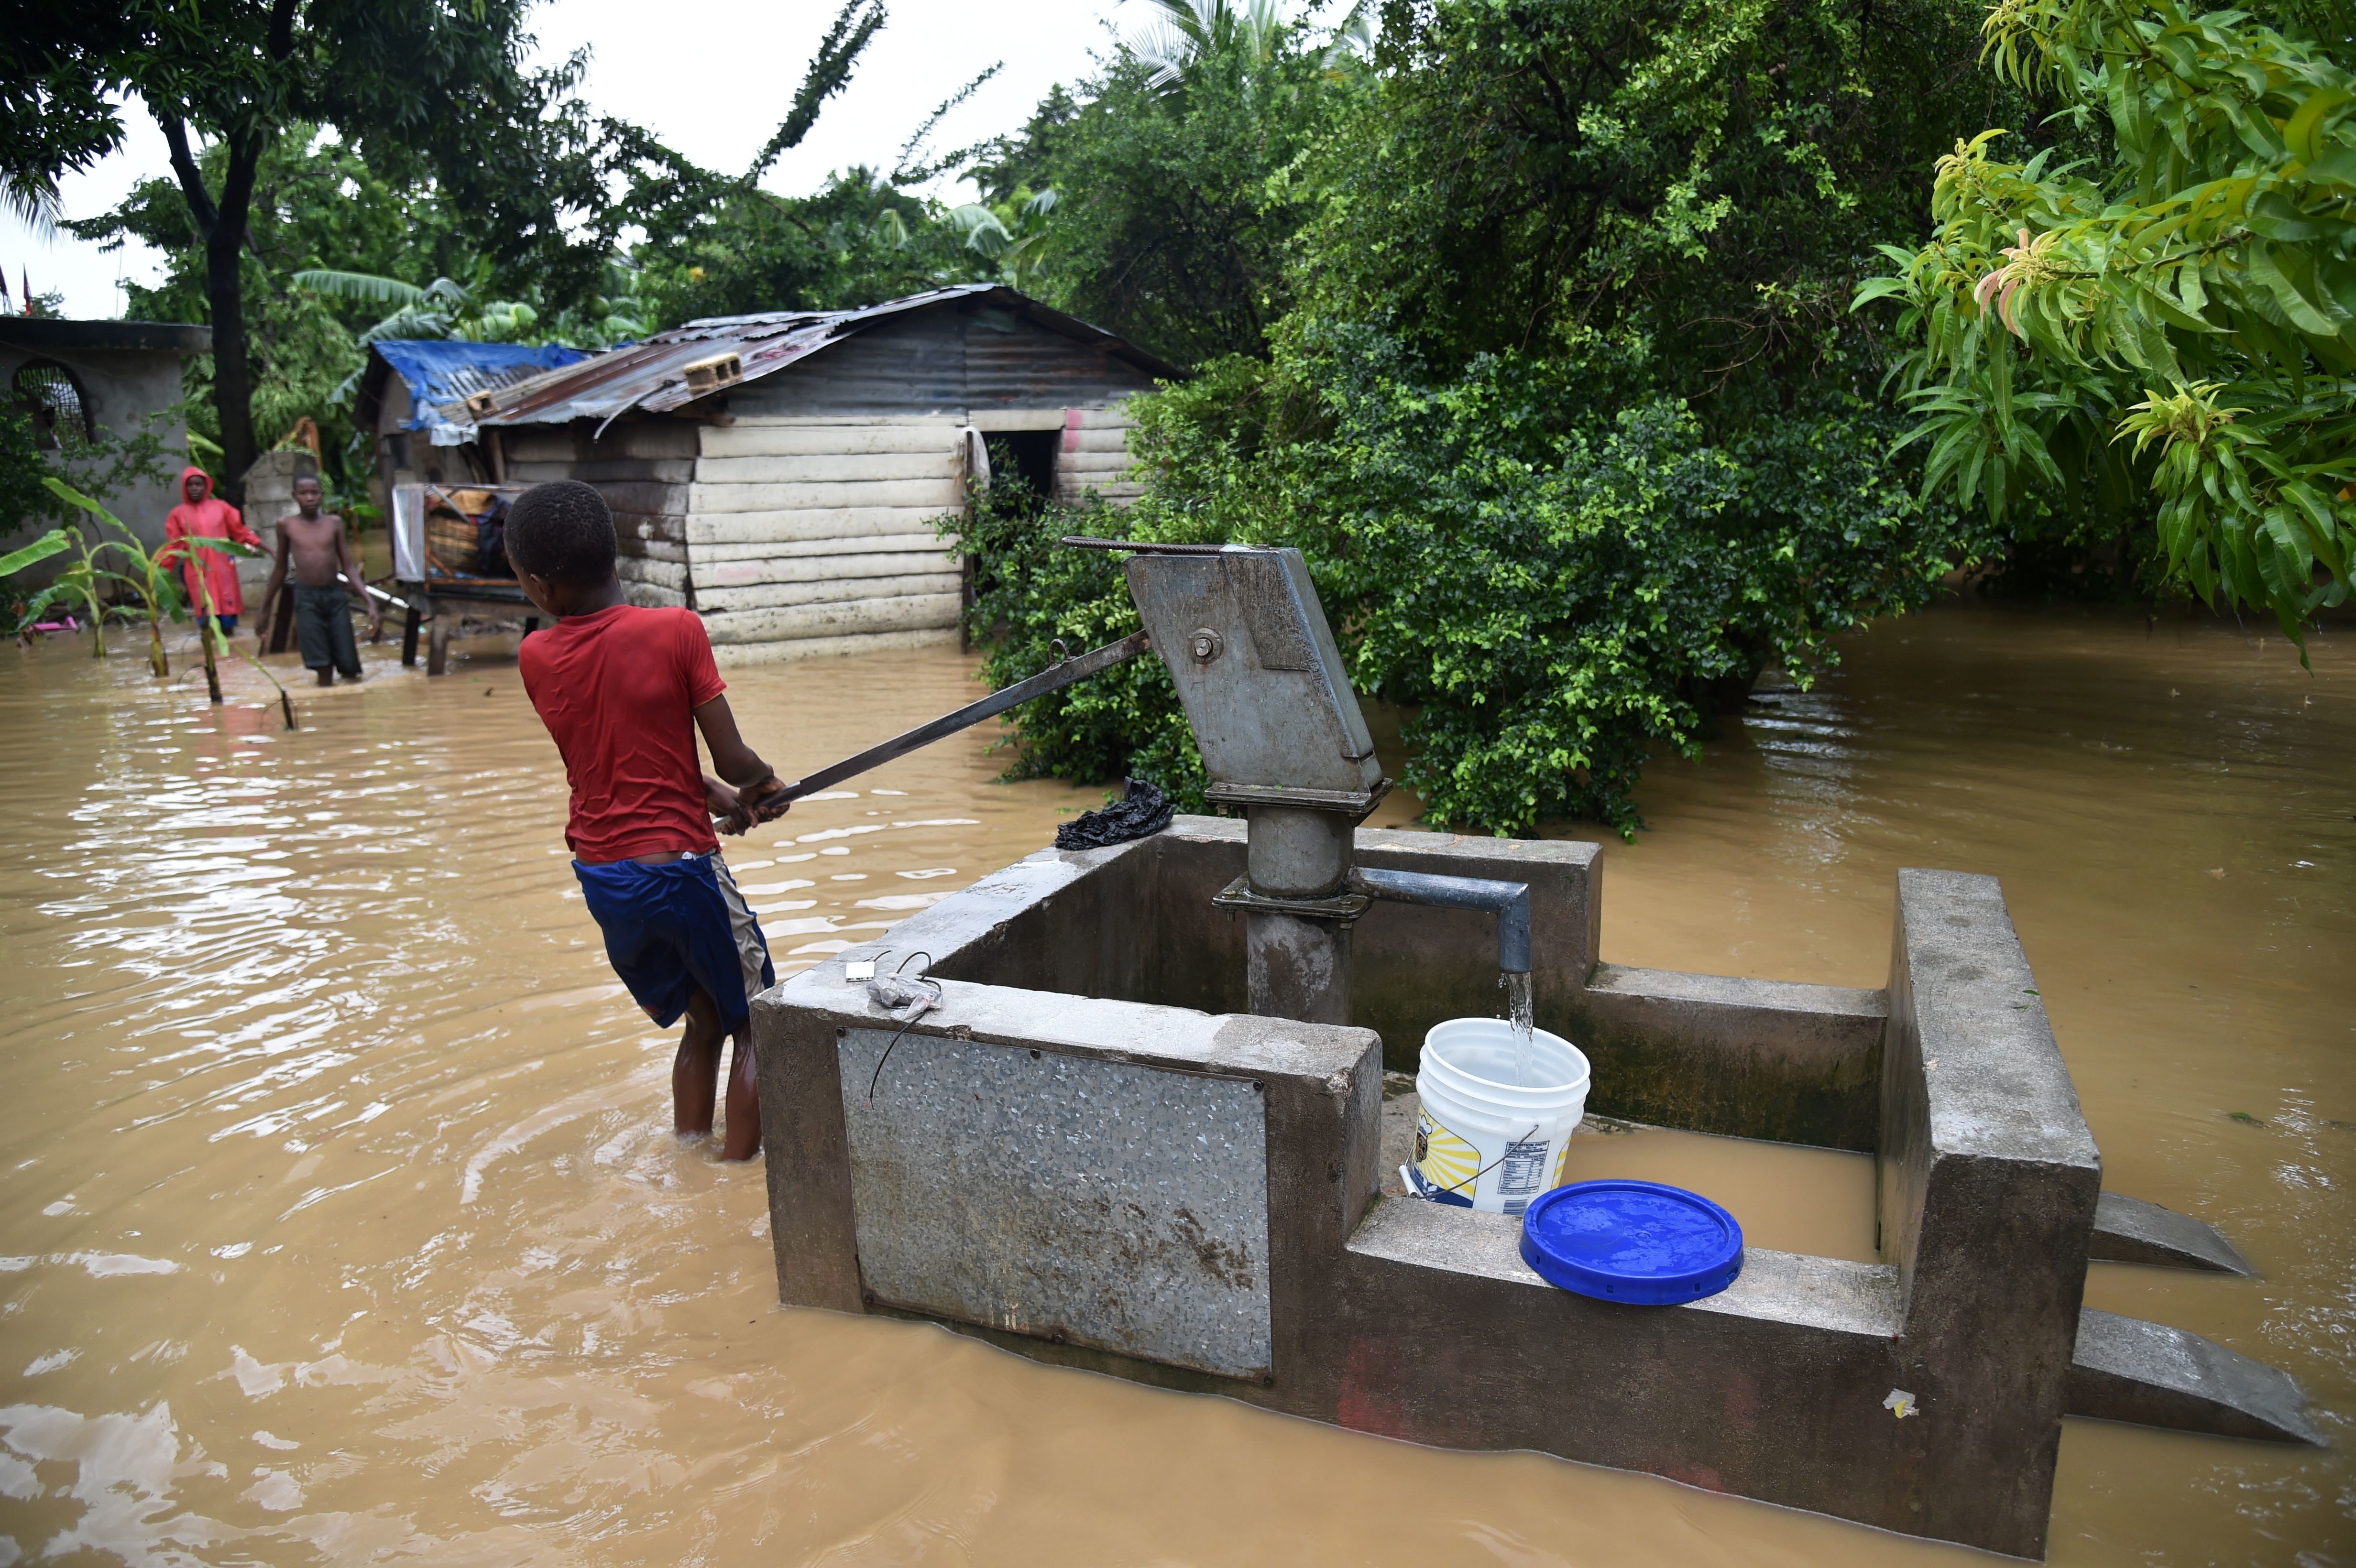 A boy pumps water close to his family's flooded home in Leogane on Wednesday. (Photo by Hector Retamal/AFP/Getty Images)